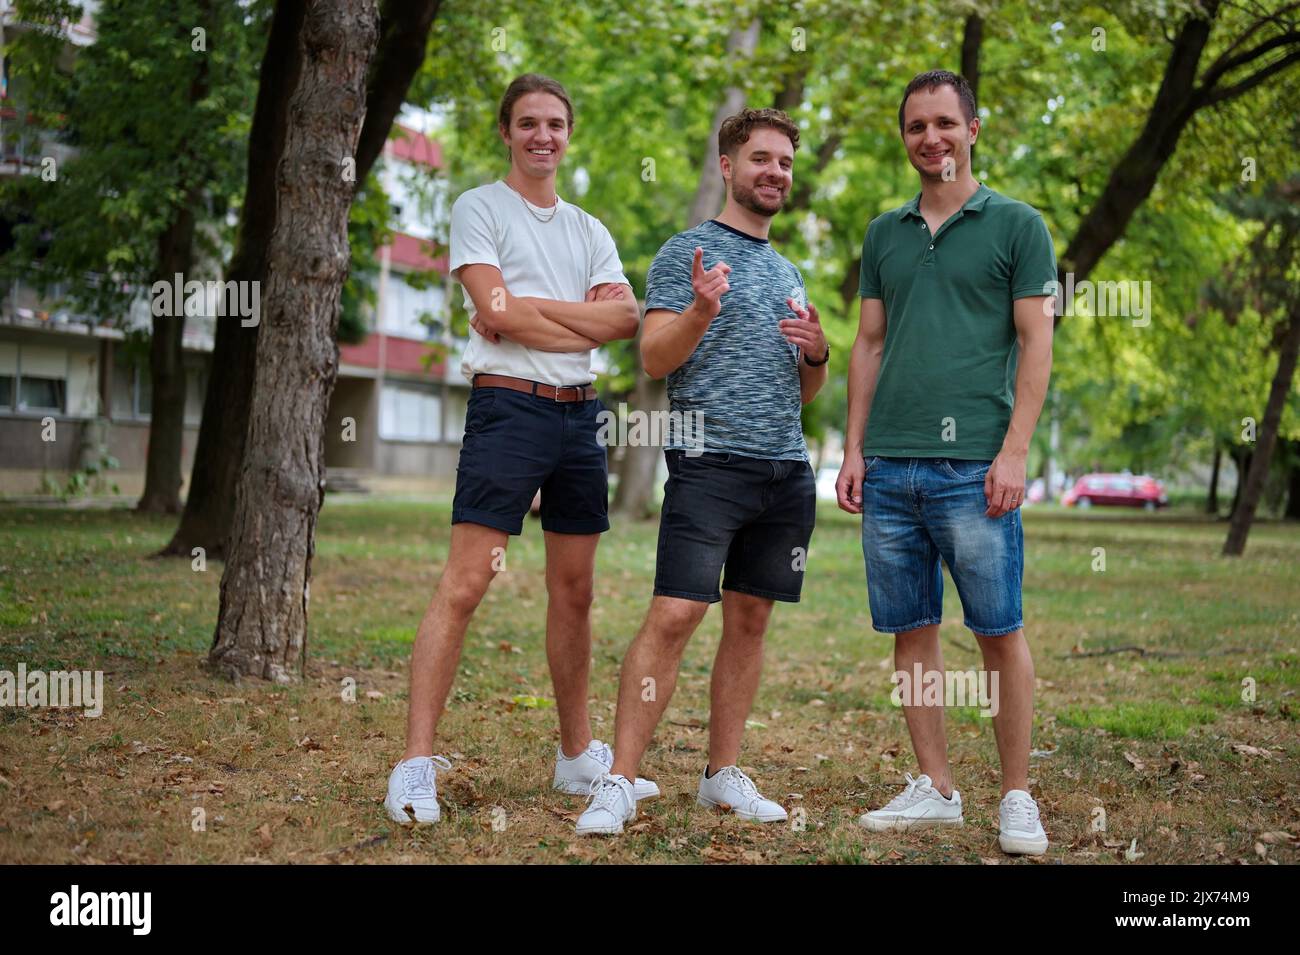 Three handsome young men having fun in a park Stock Photo